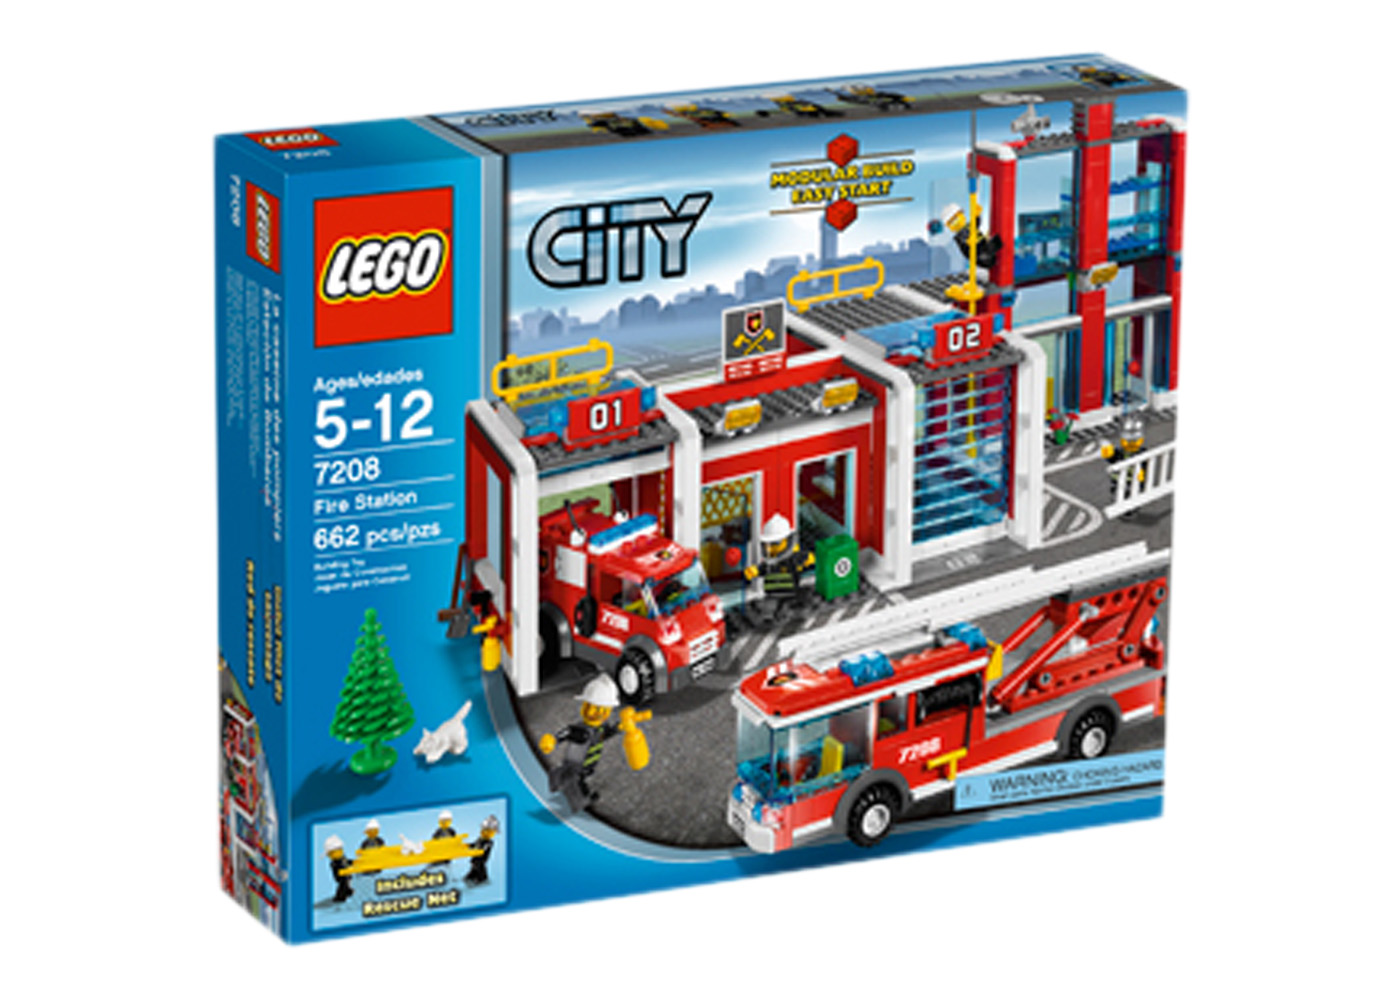 LEGO City Seaside Police and Fire Mission Set 60308 - CN